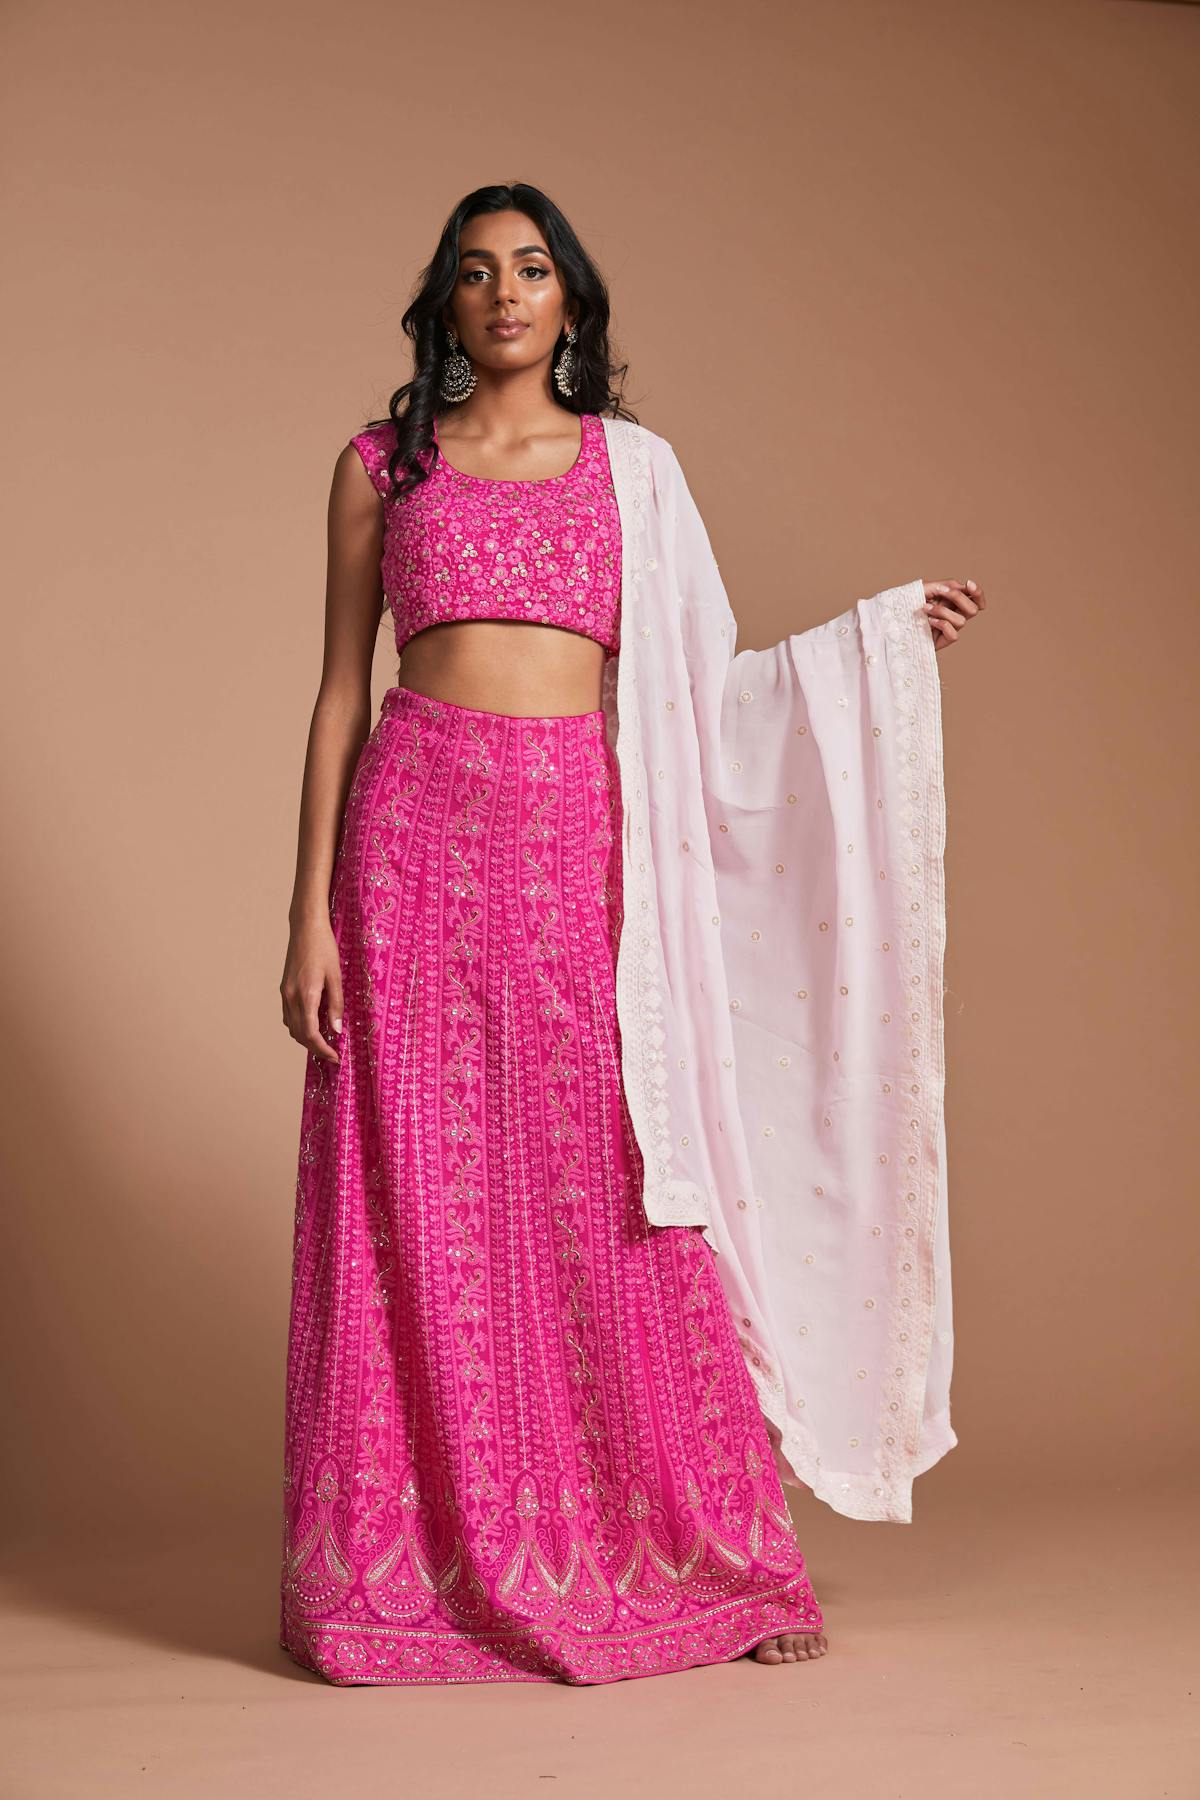 colorful attire to wear to a south asian wedding